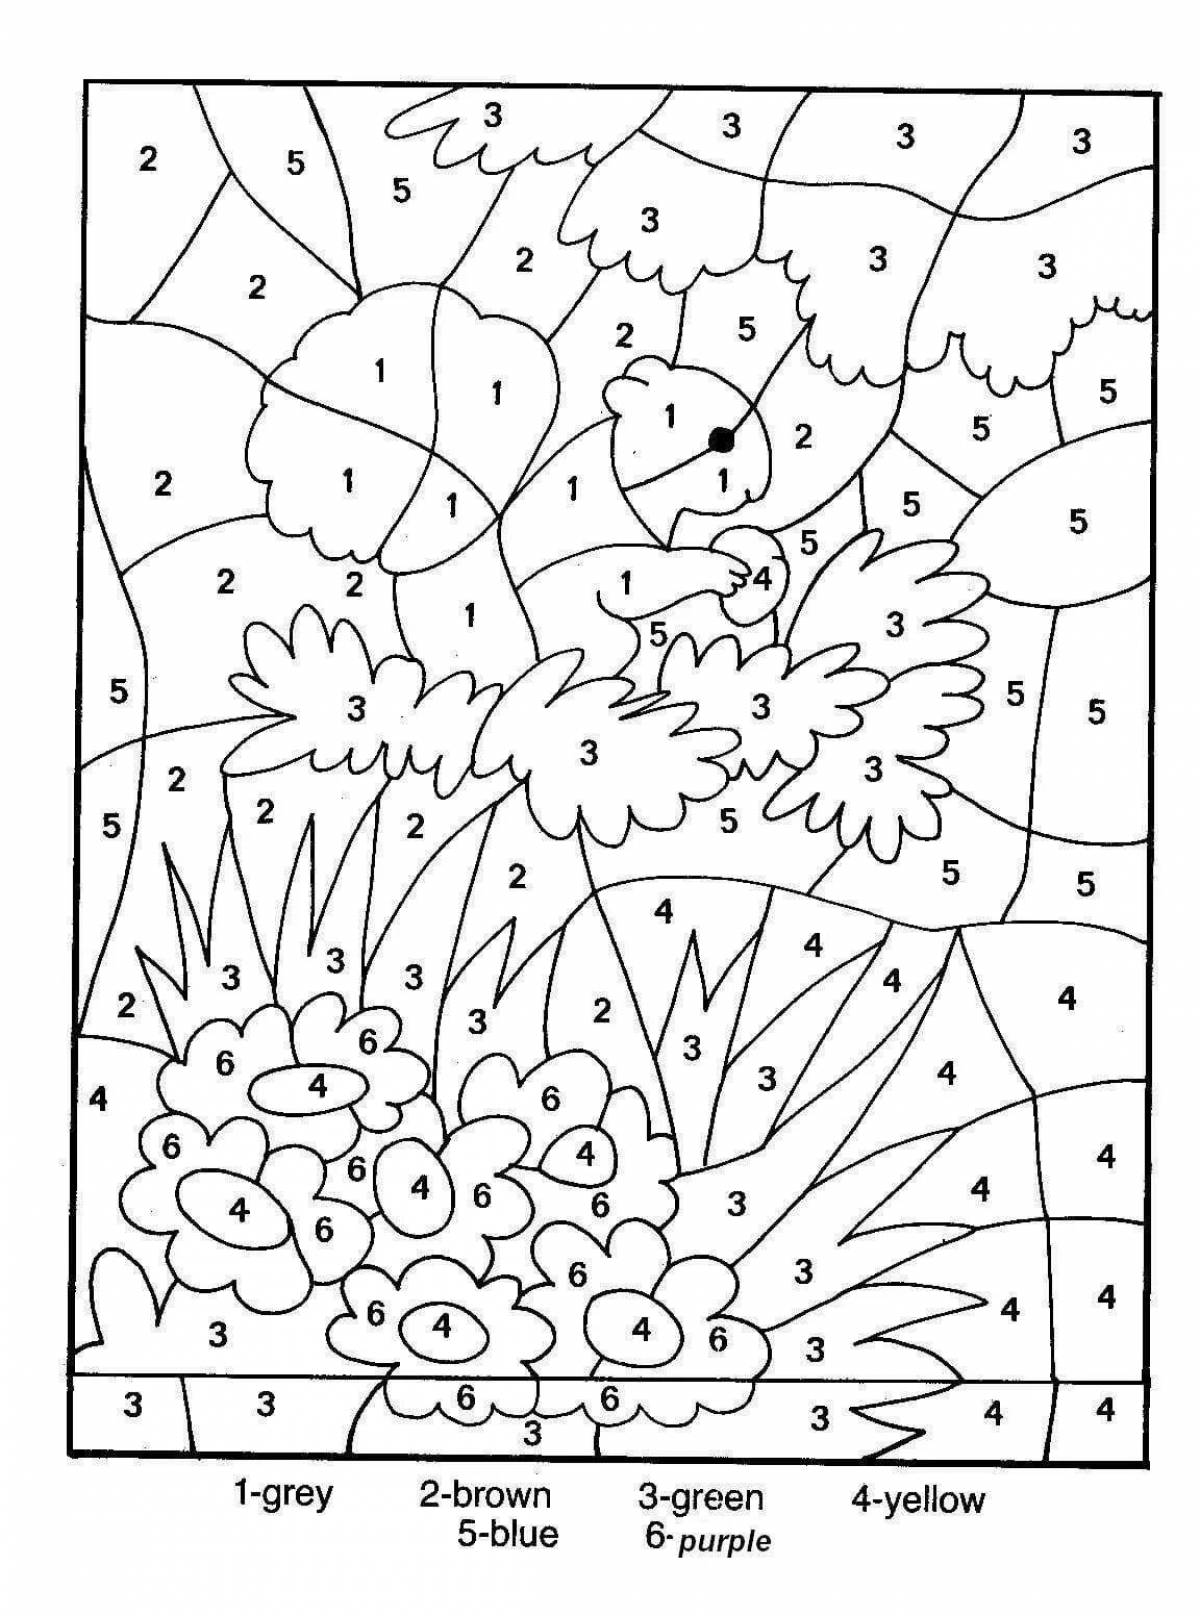 Colorful coloring book color by number